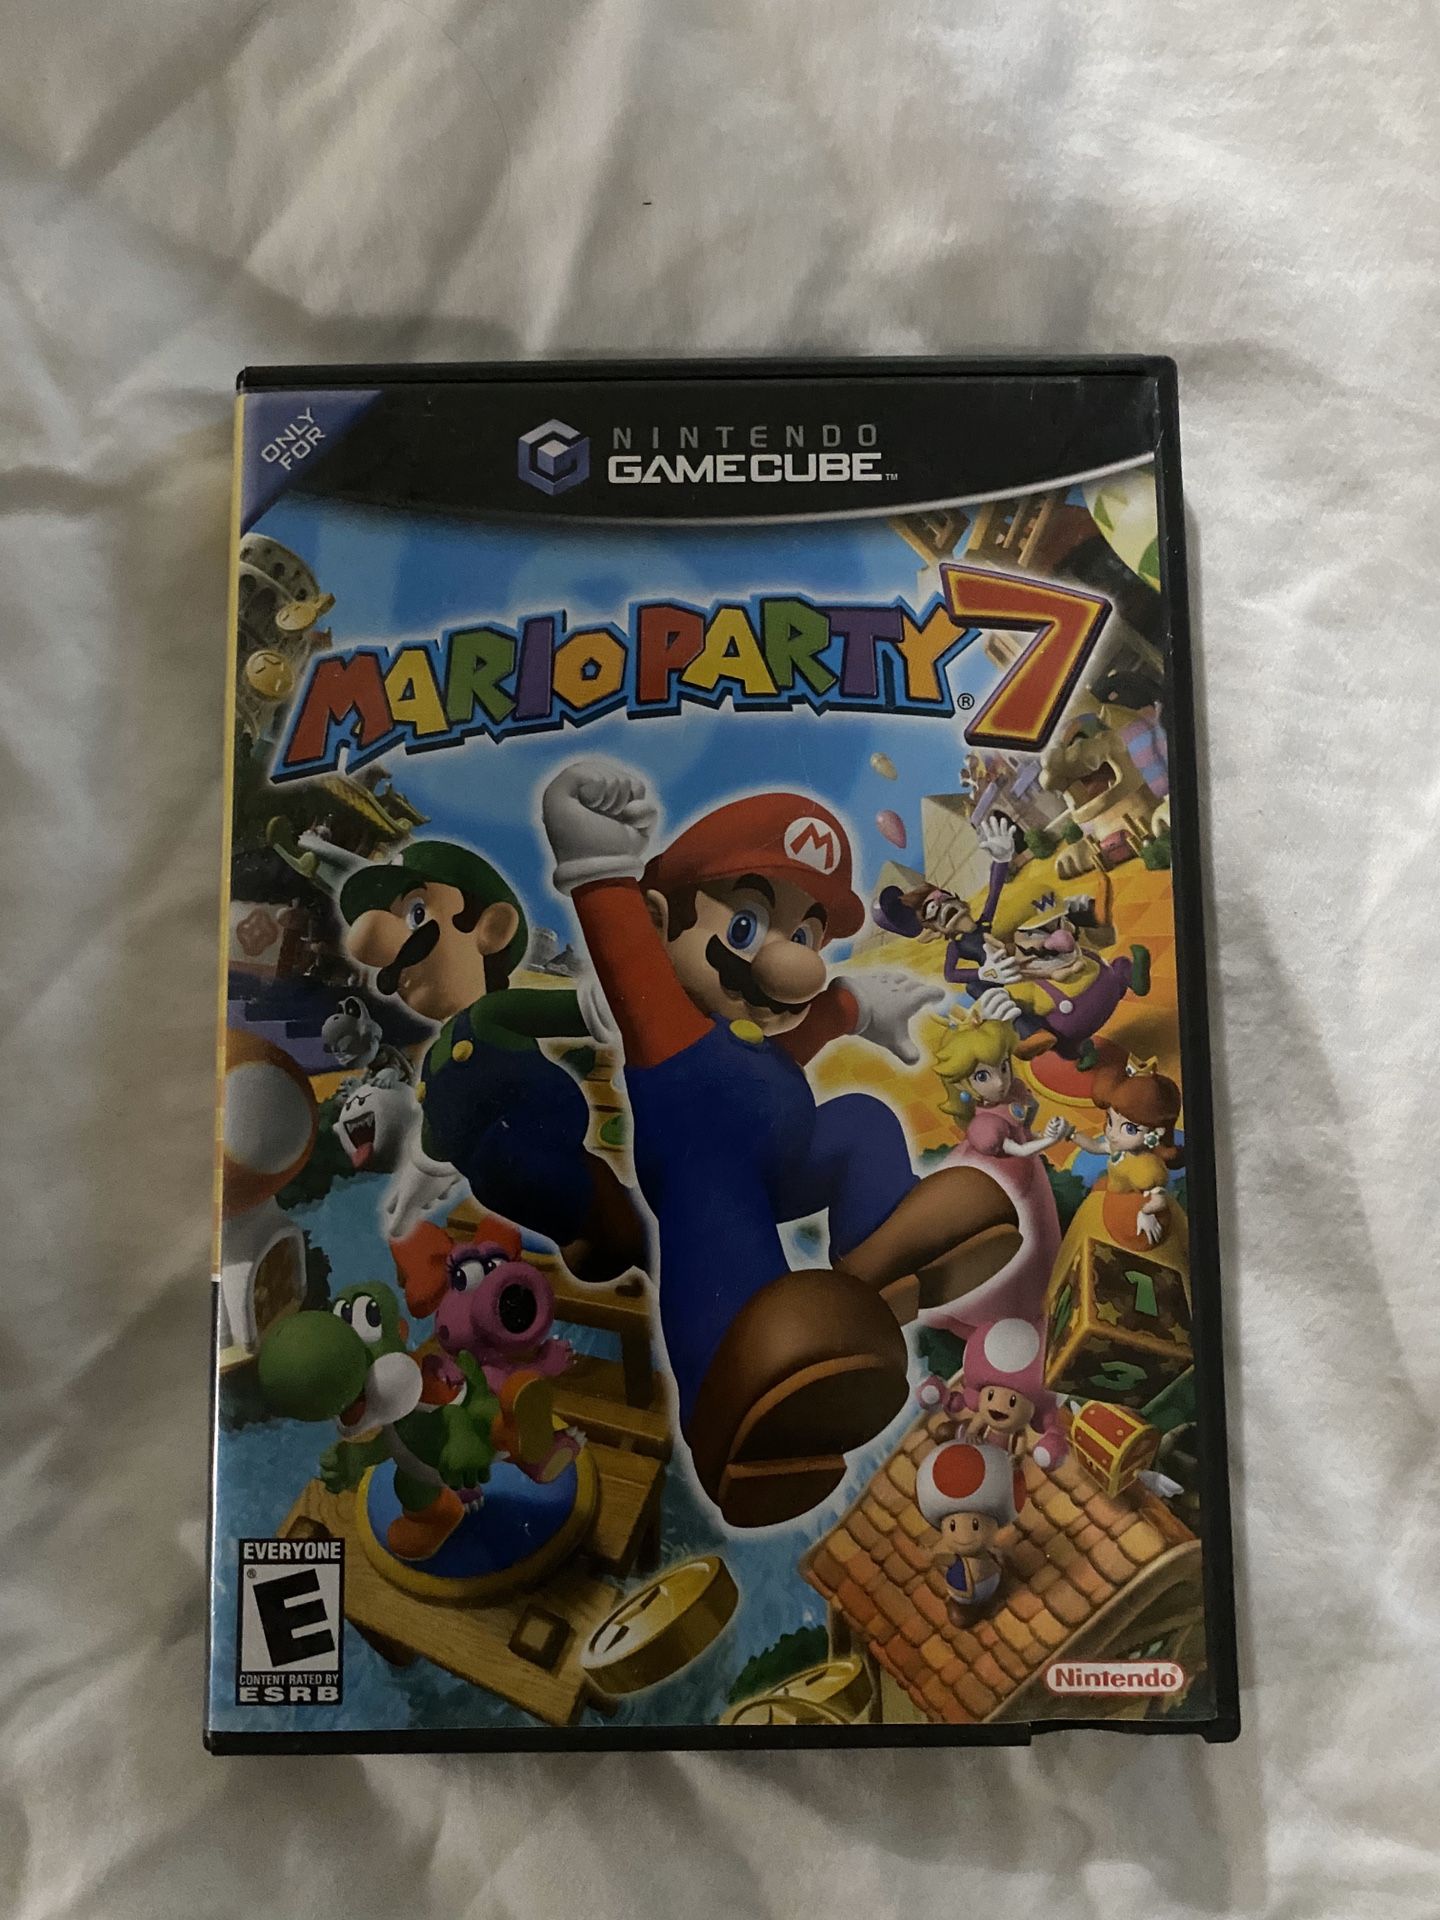 Mario party 7 for GameCube